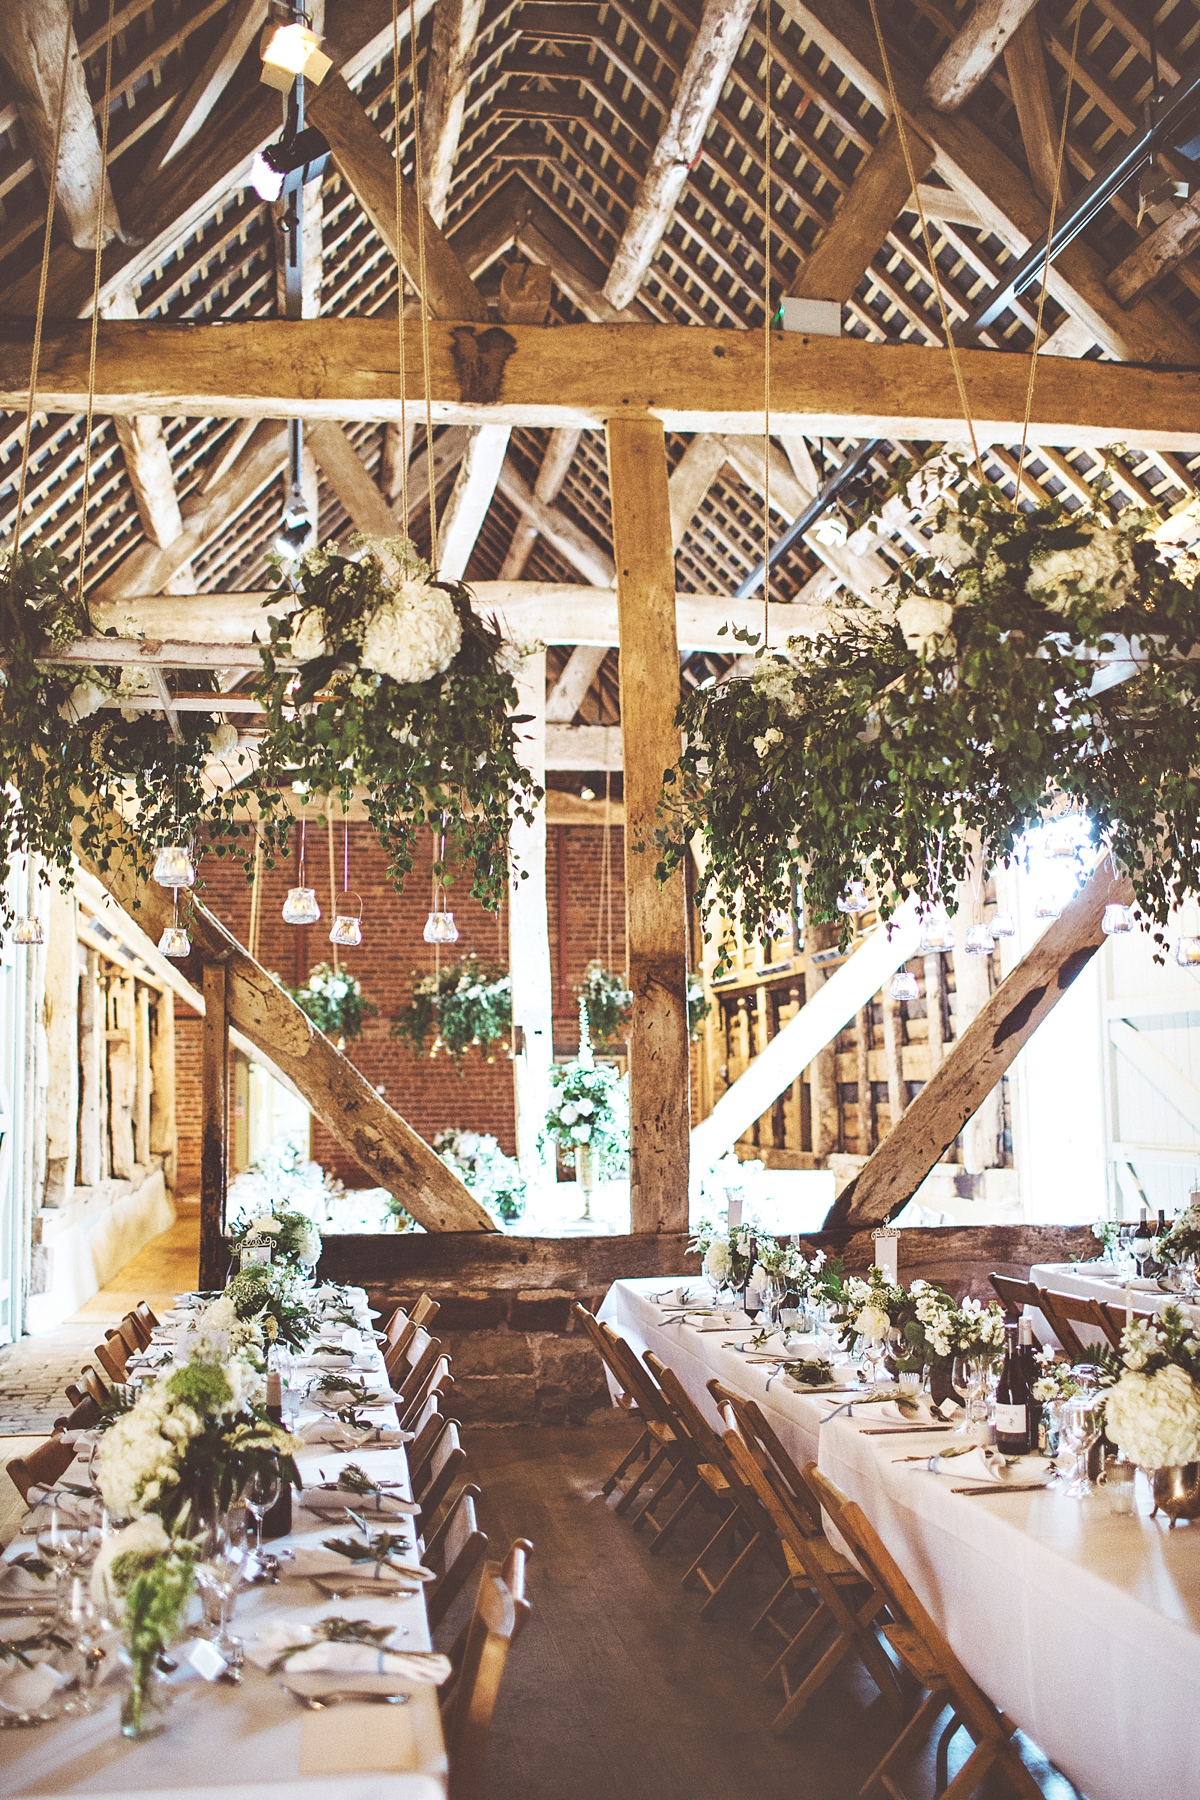 51 A Flora bride dress for a natural and rustic barn wedding in Shropshire